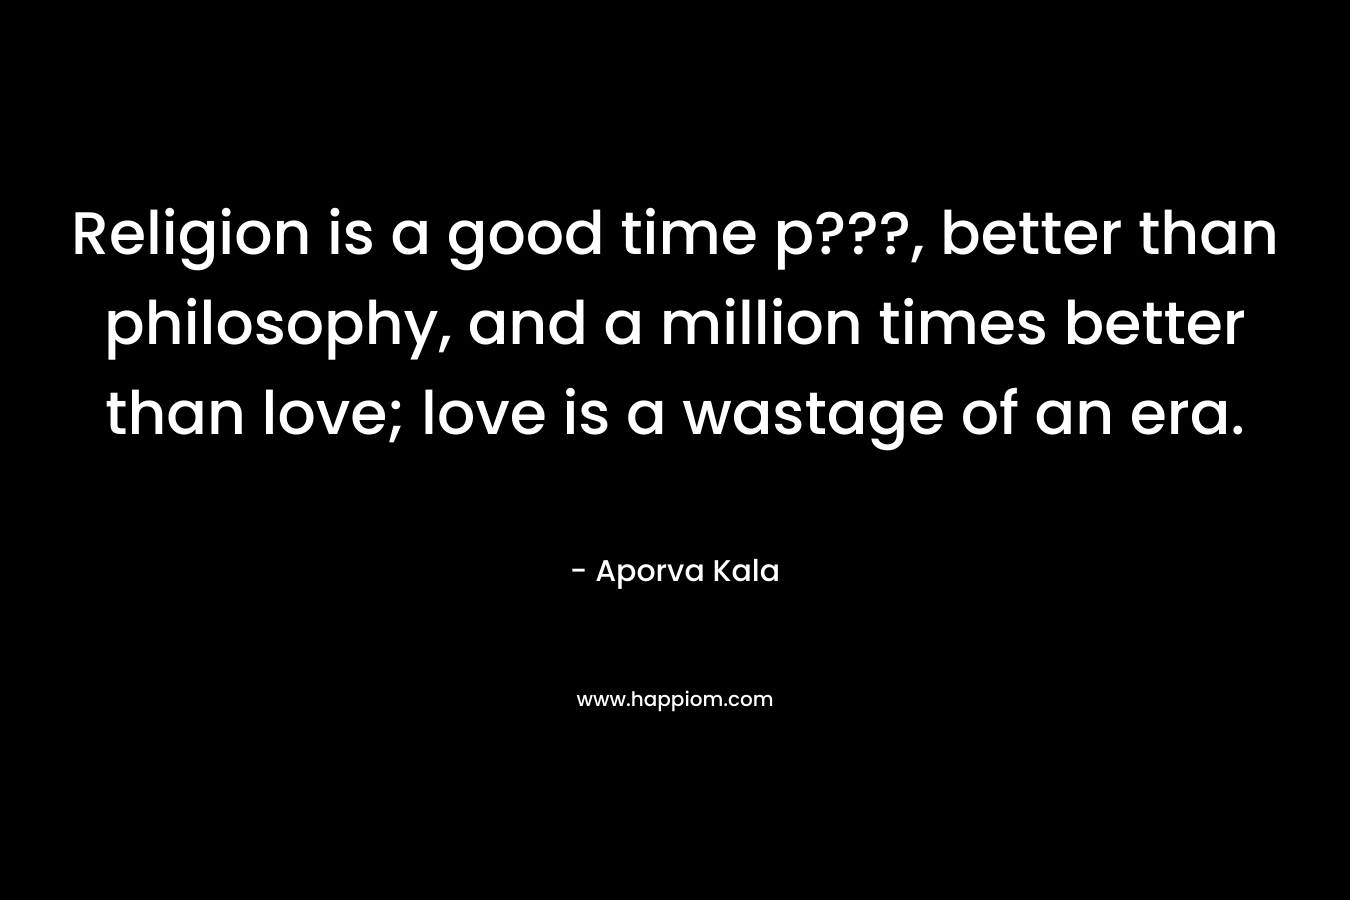 Religion is a good time p???, better than philosophy, and a million times better than love; love is a wastage of an era. – Aporva Kala